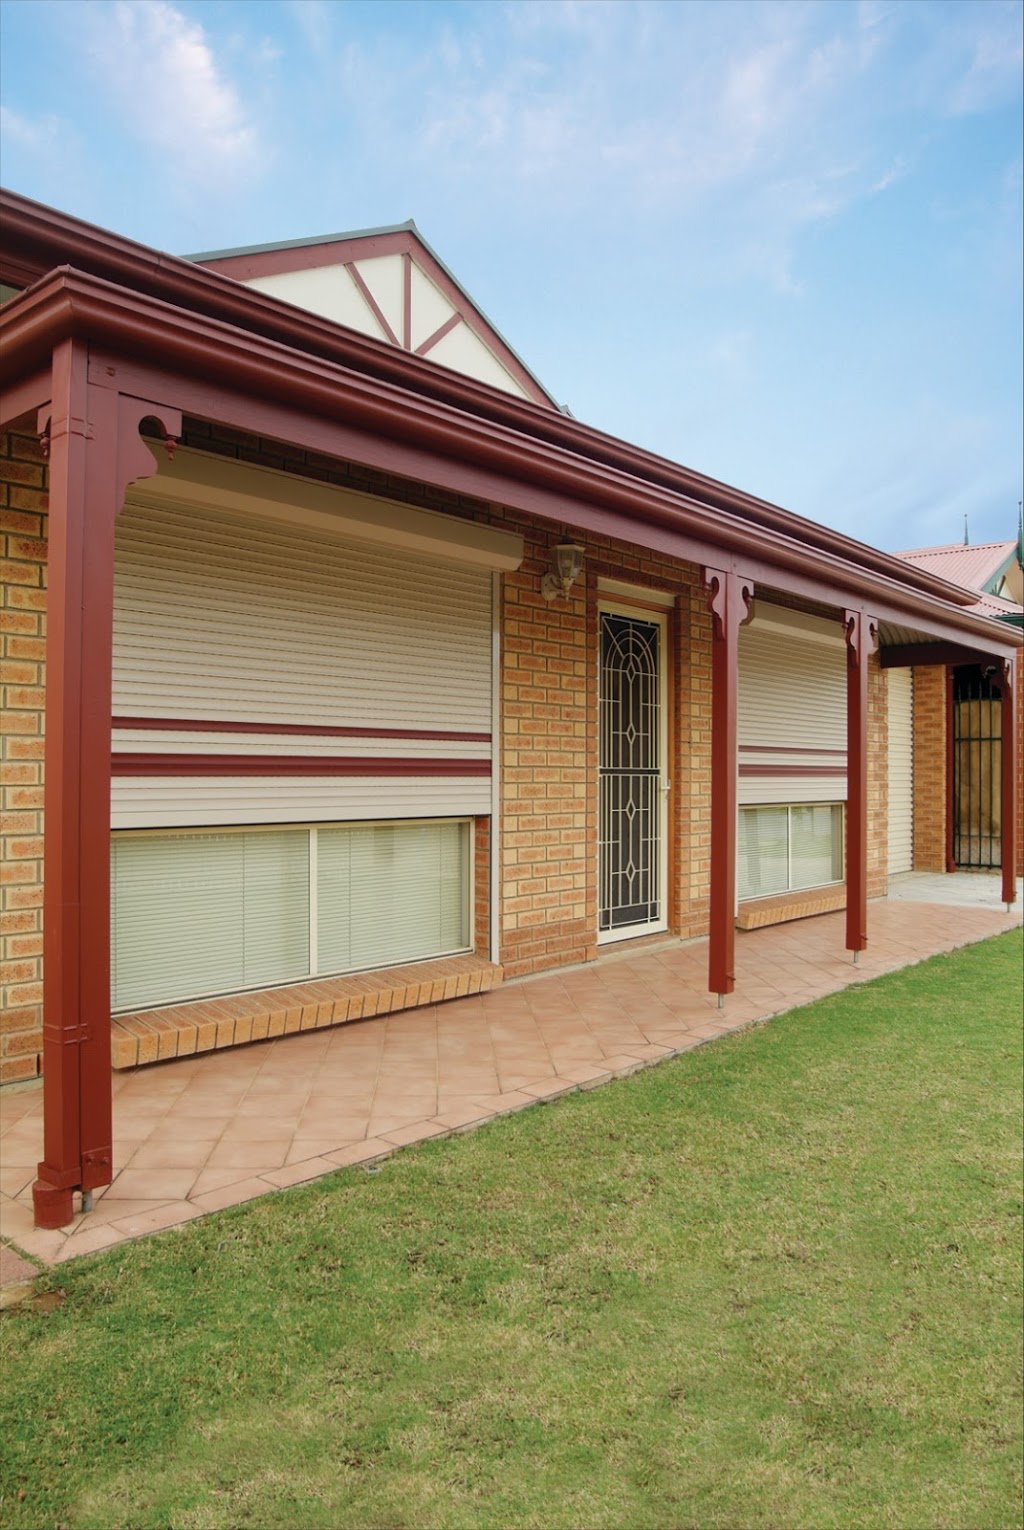 Doors Blinds & Shutters Direct Coffs Harbour | store | 52 Marcia Street CORNER, 164 Pacific Hwy, Coffs Harbour NSW 2450, Australia | 0266580400 OR +61 2 6658 0400